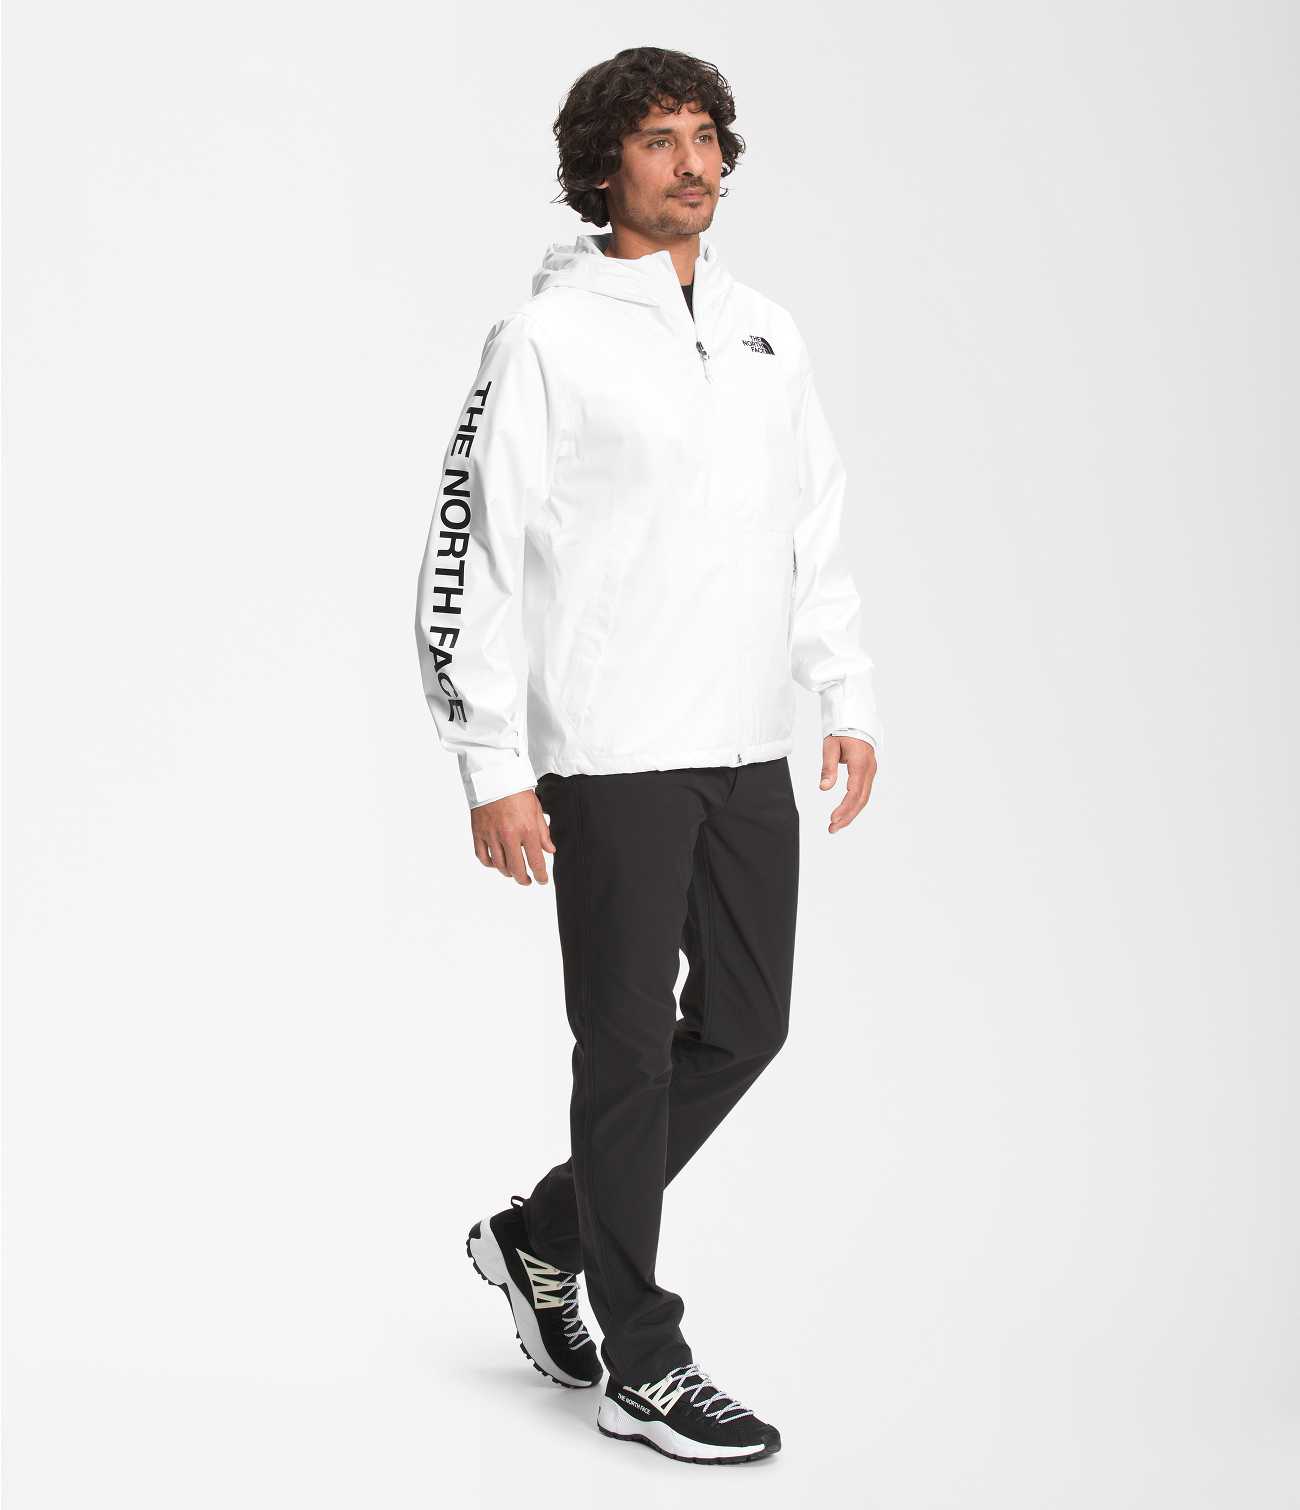 The North Face MILLERTON Rain Jacket with Half Dome Back Print in Black